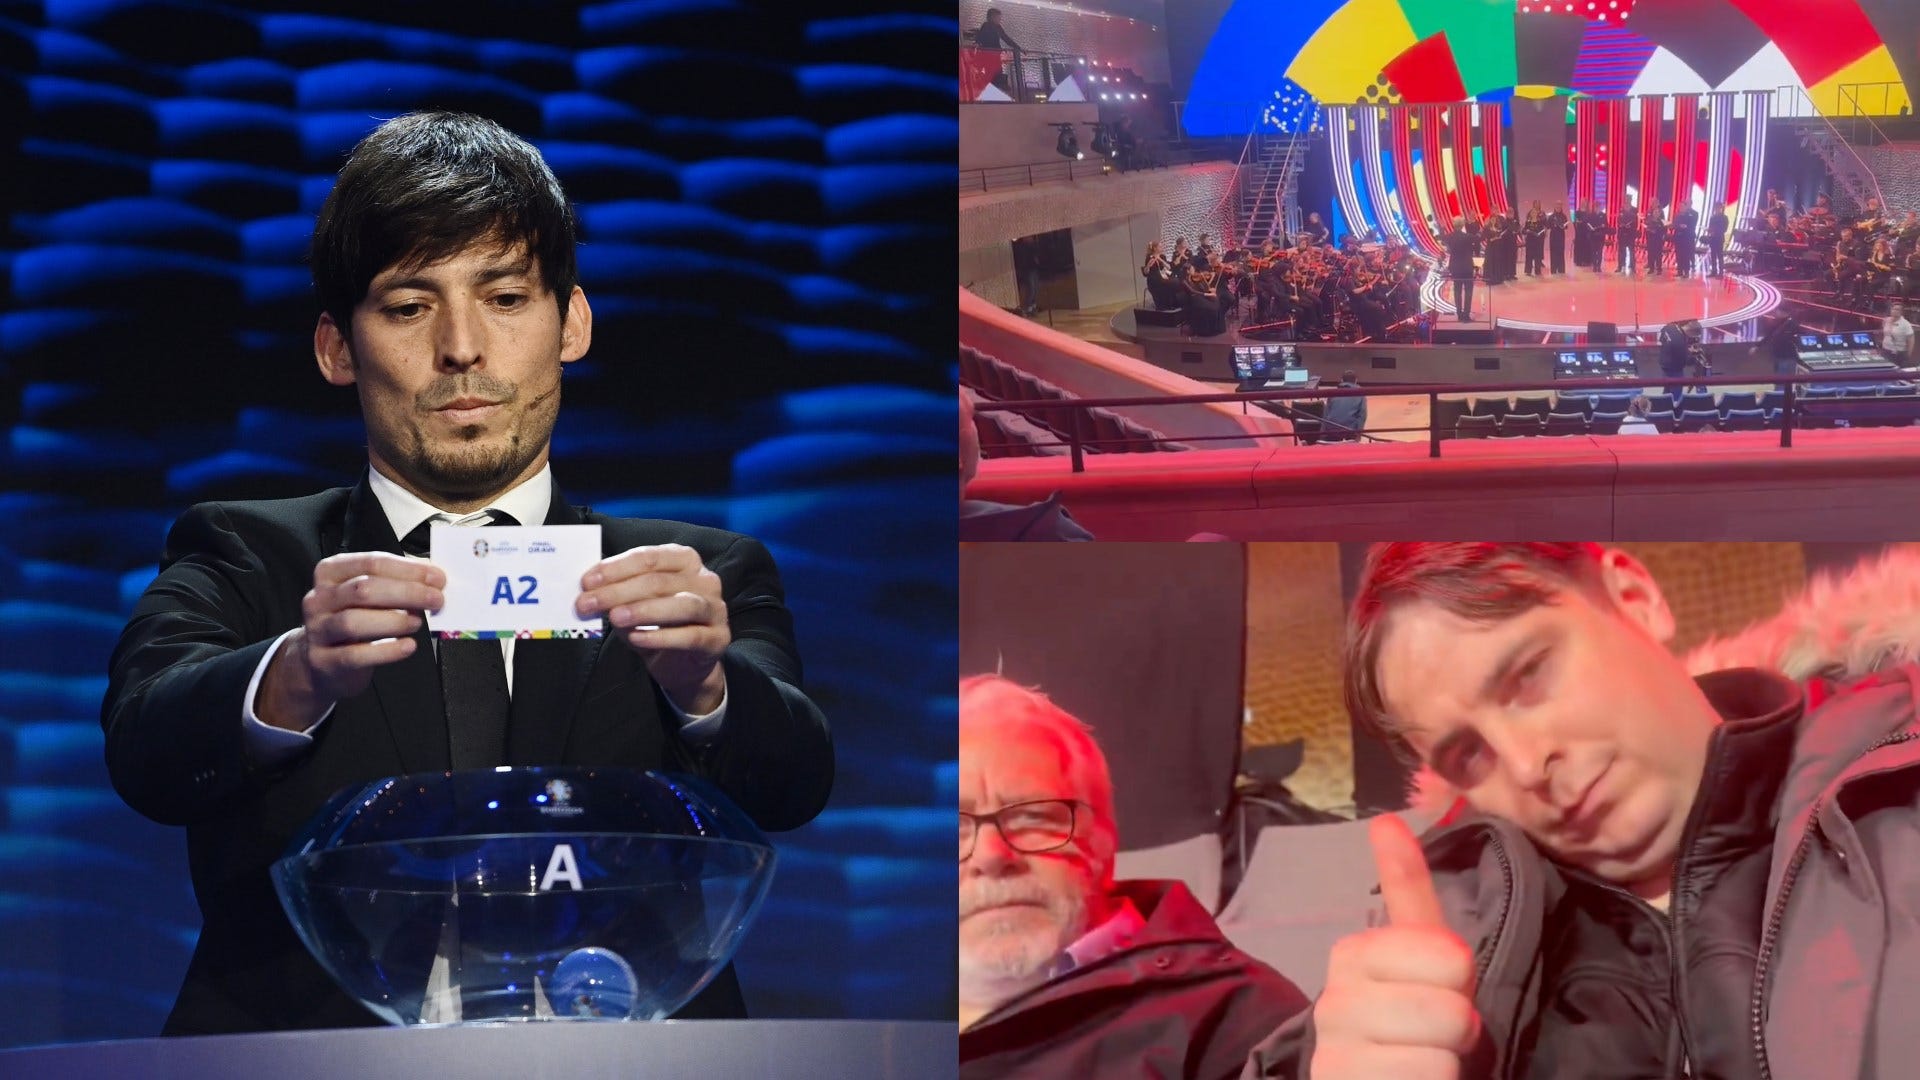 Revealed: Sex noises that caused havoc at Euro 2024 draw were carried out by comedian as he posts live videos from Germany to show exactly how he pulled off prank